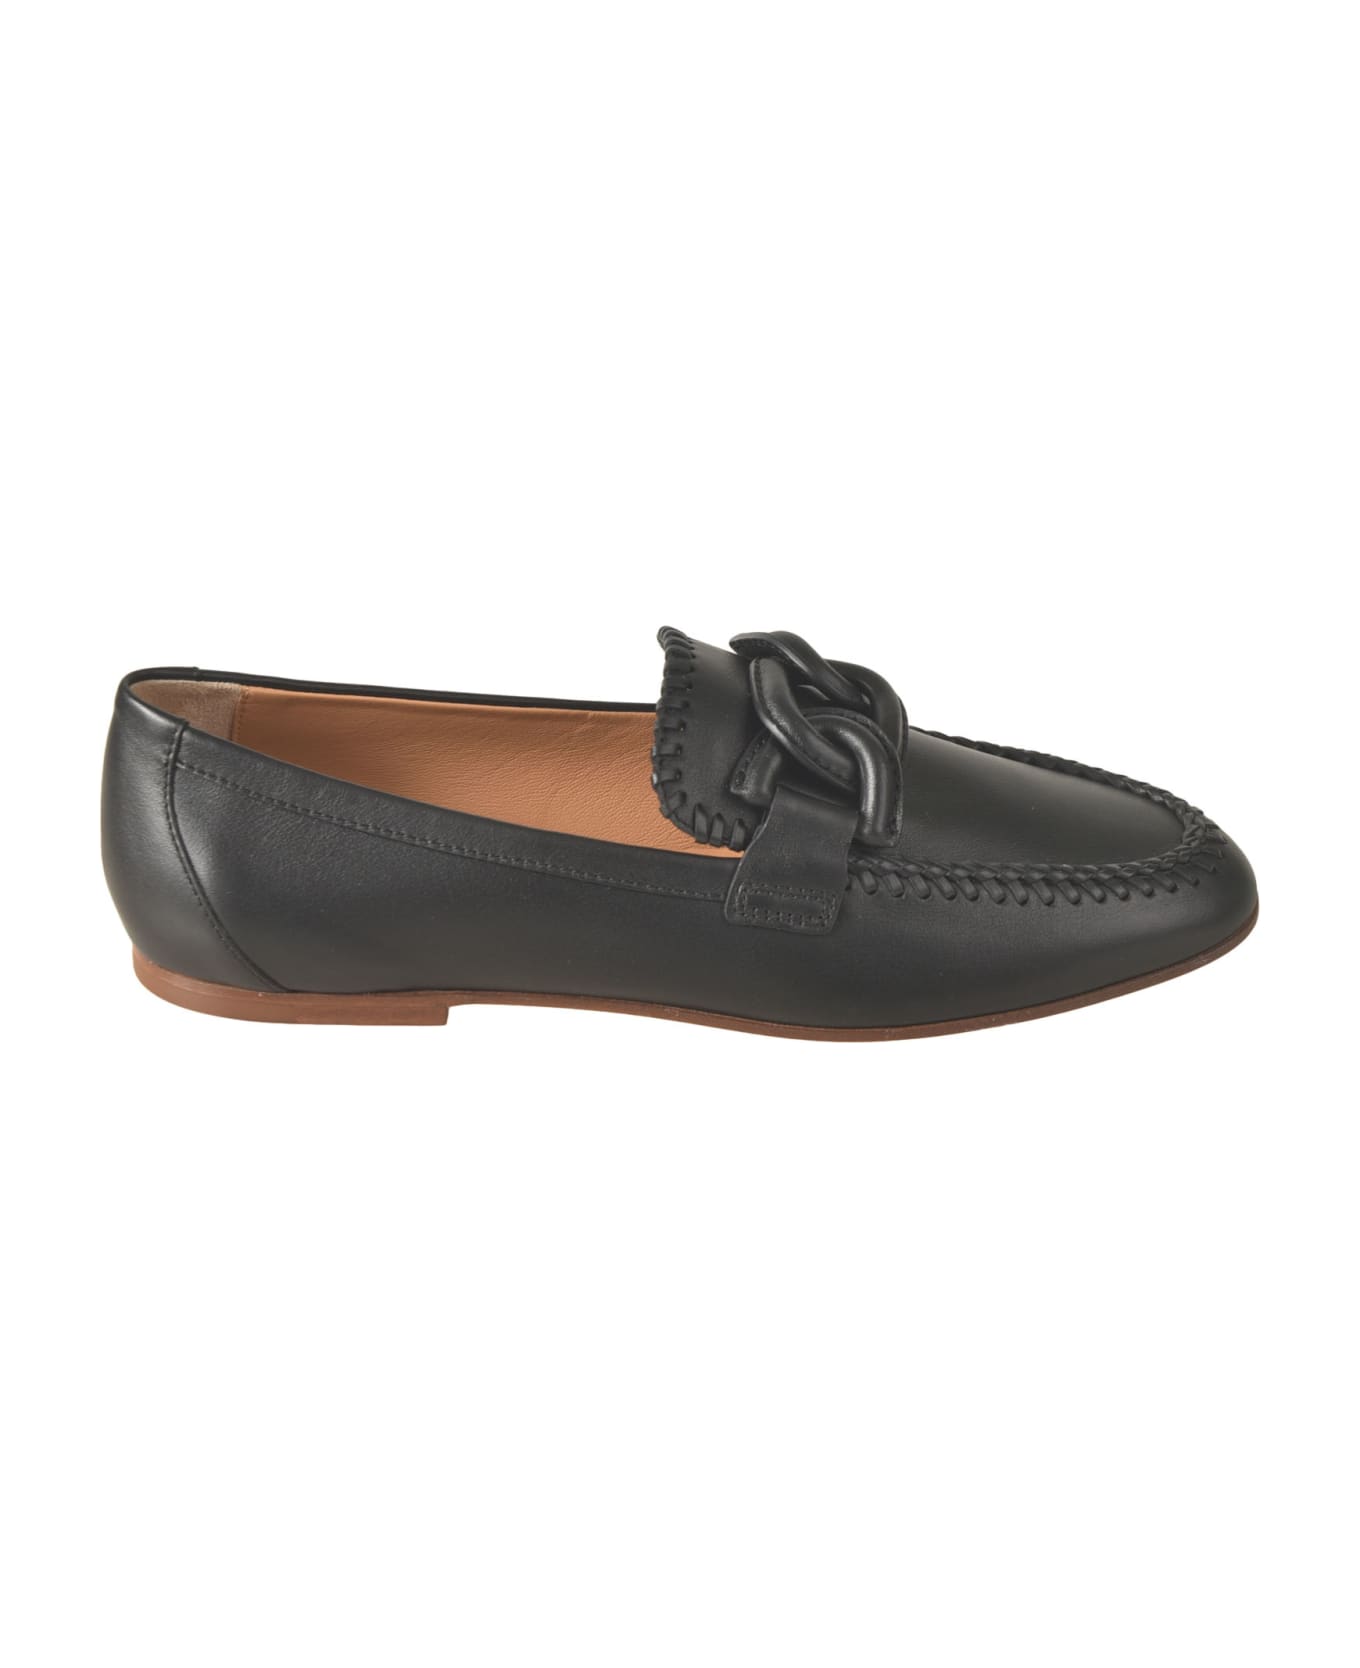 Tod's 79a Infilatura Loafers - Black